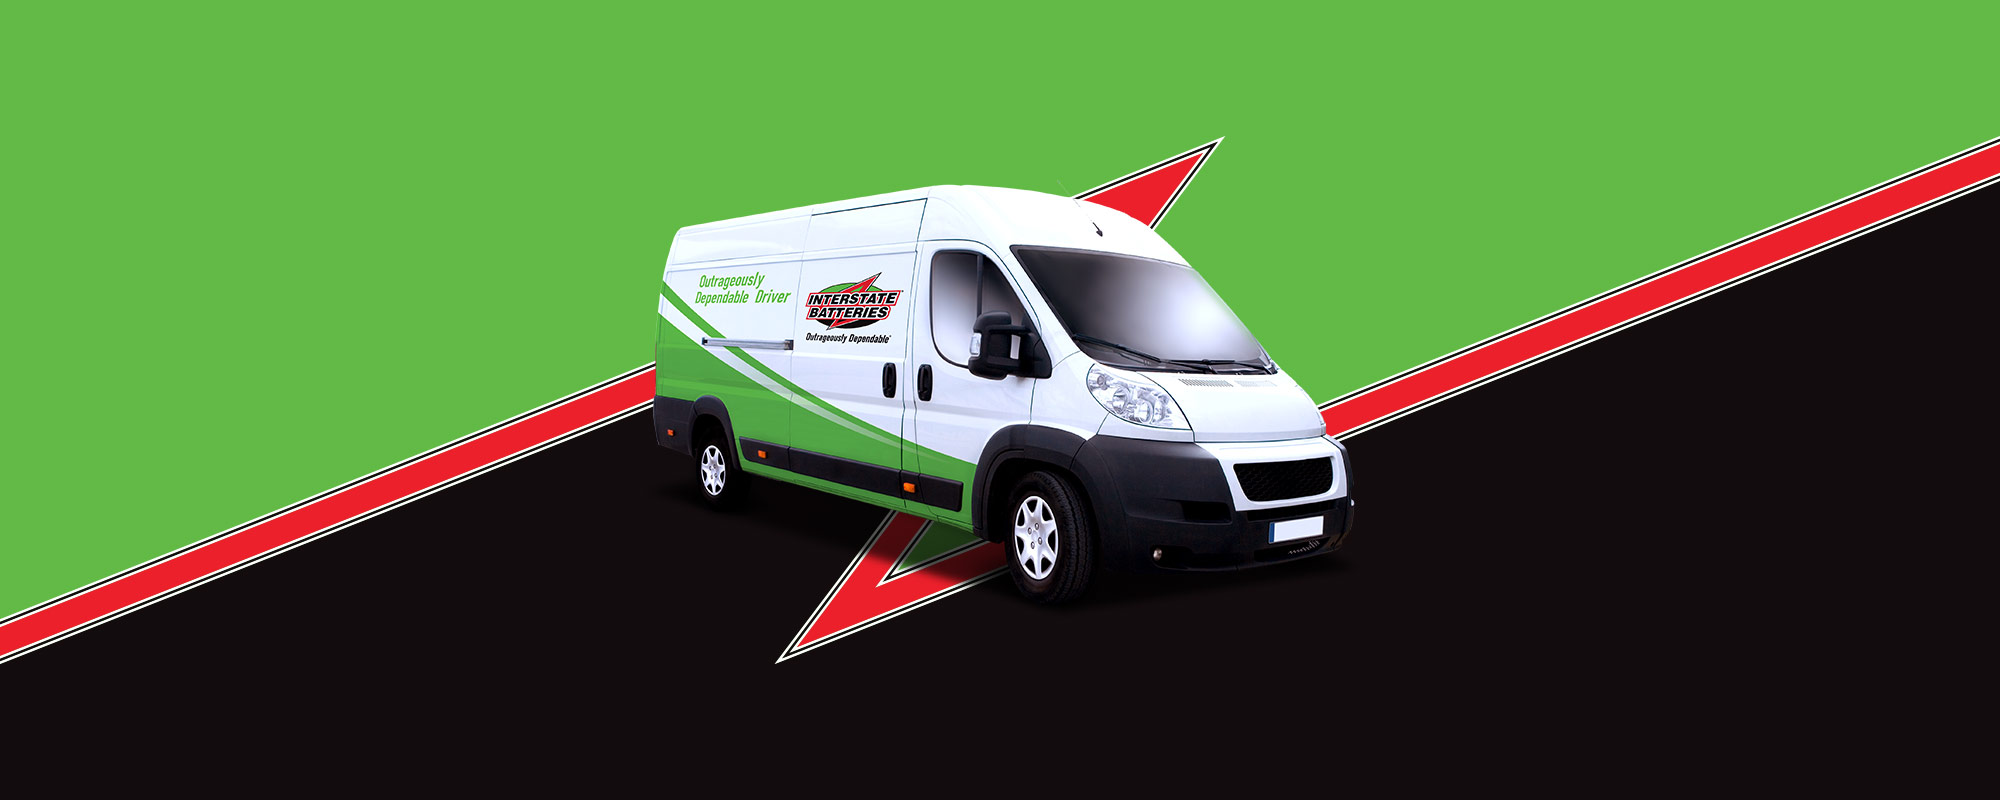 Interstate Batteries-branded van on a green and black background